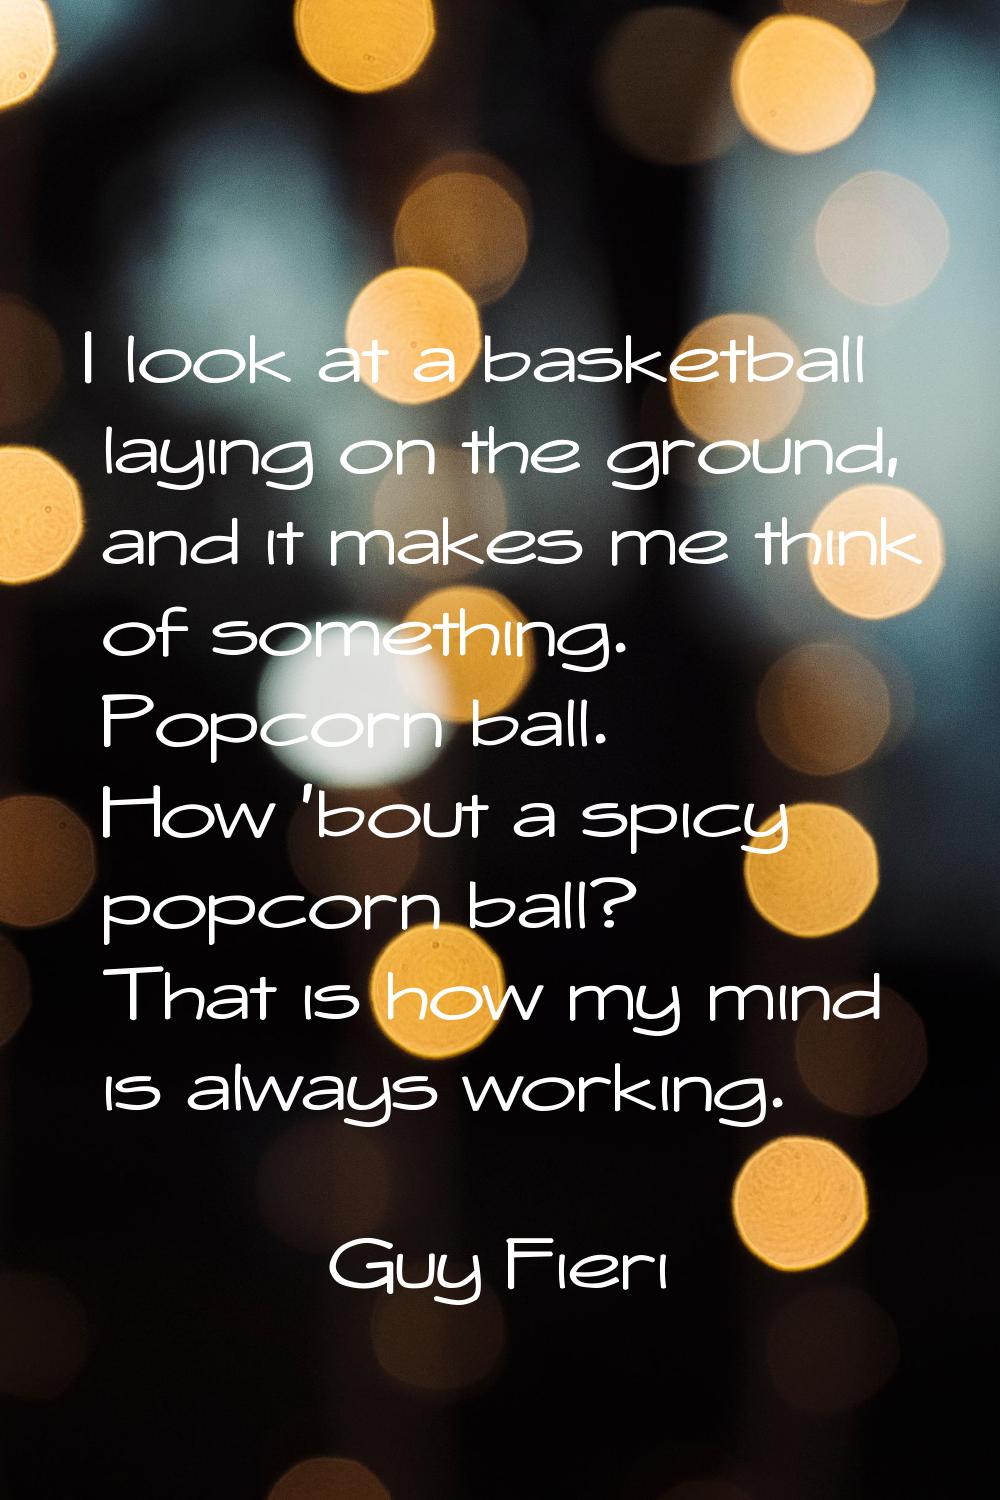 I look at a basketball laying on the ground, and it makes me think of something. Popcorn ball. How 